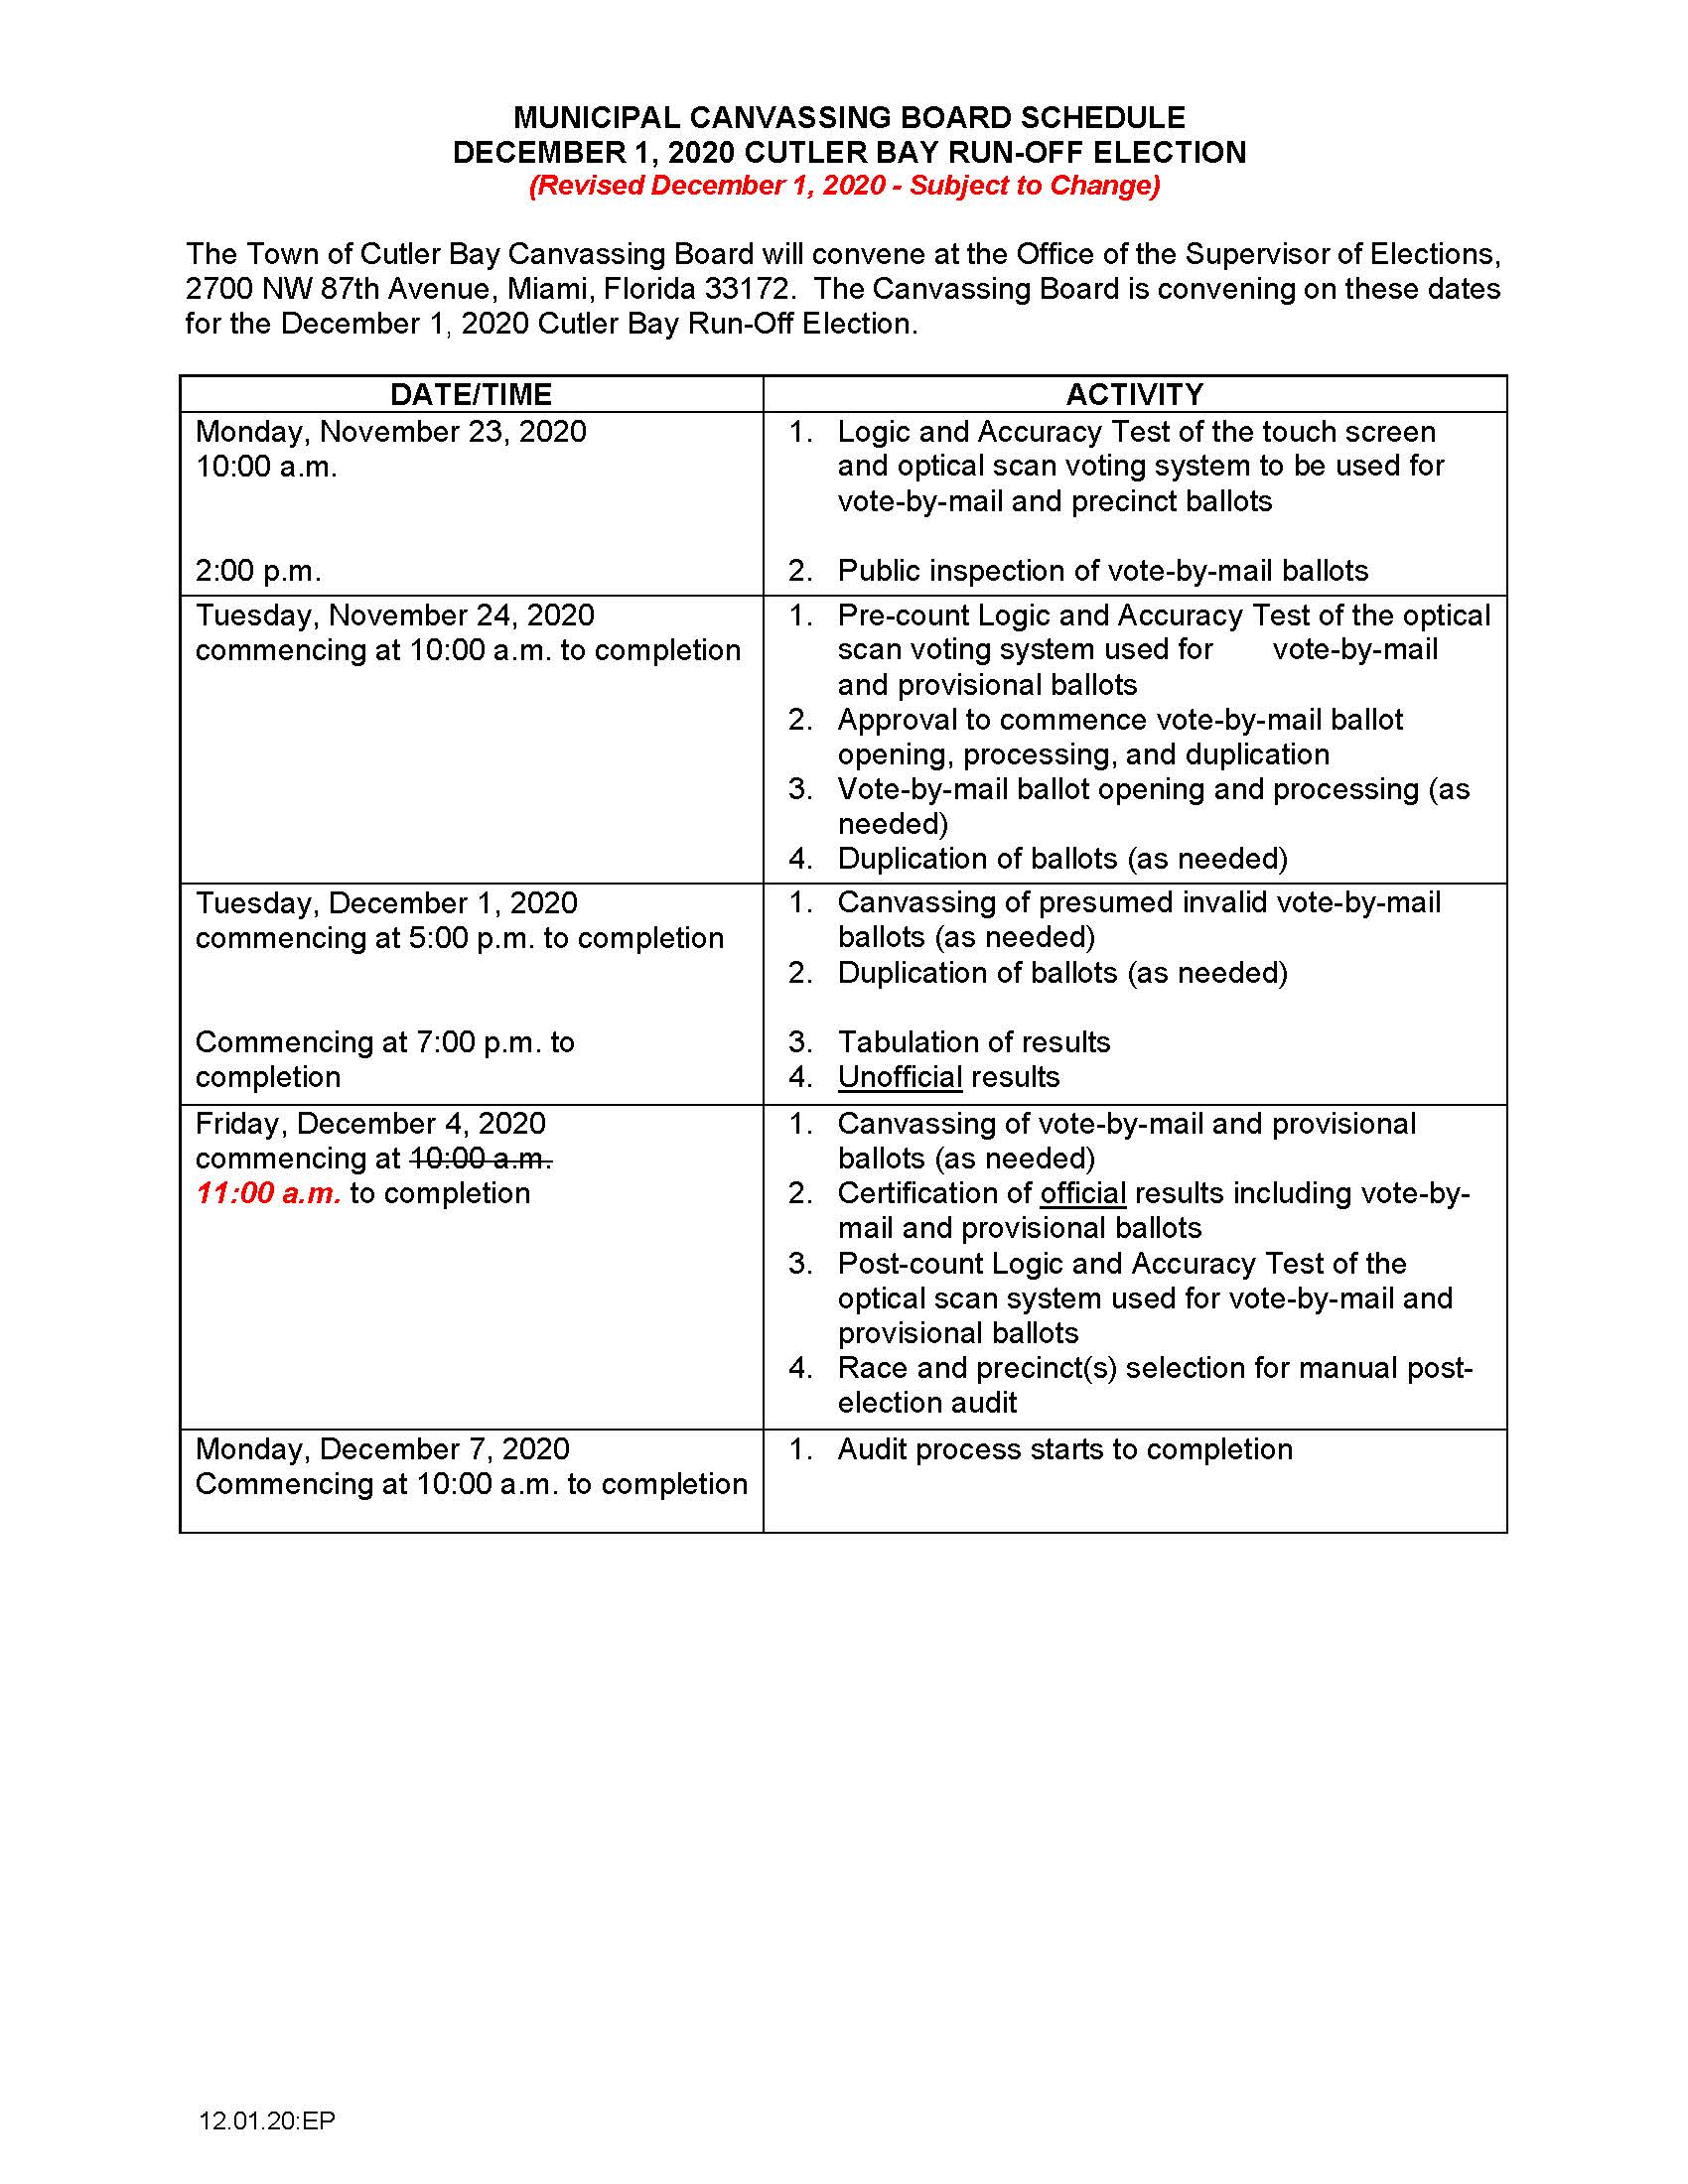 REVISED December 1 2020 Run Off Election Canvassing Board Schedule